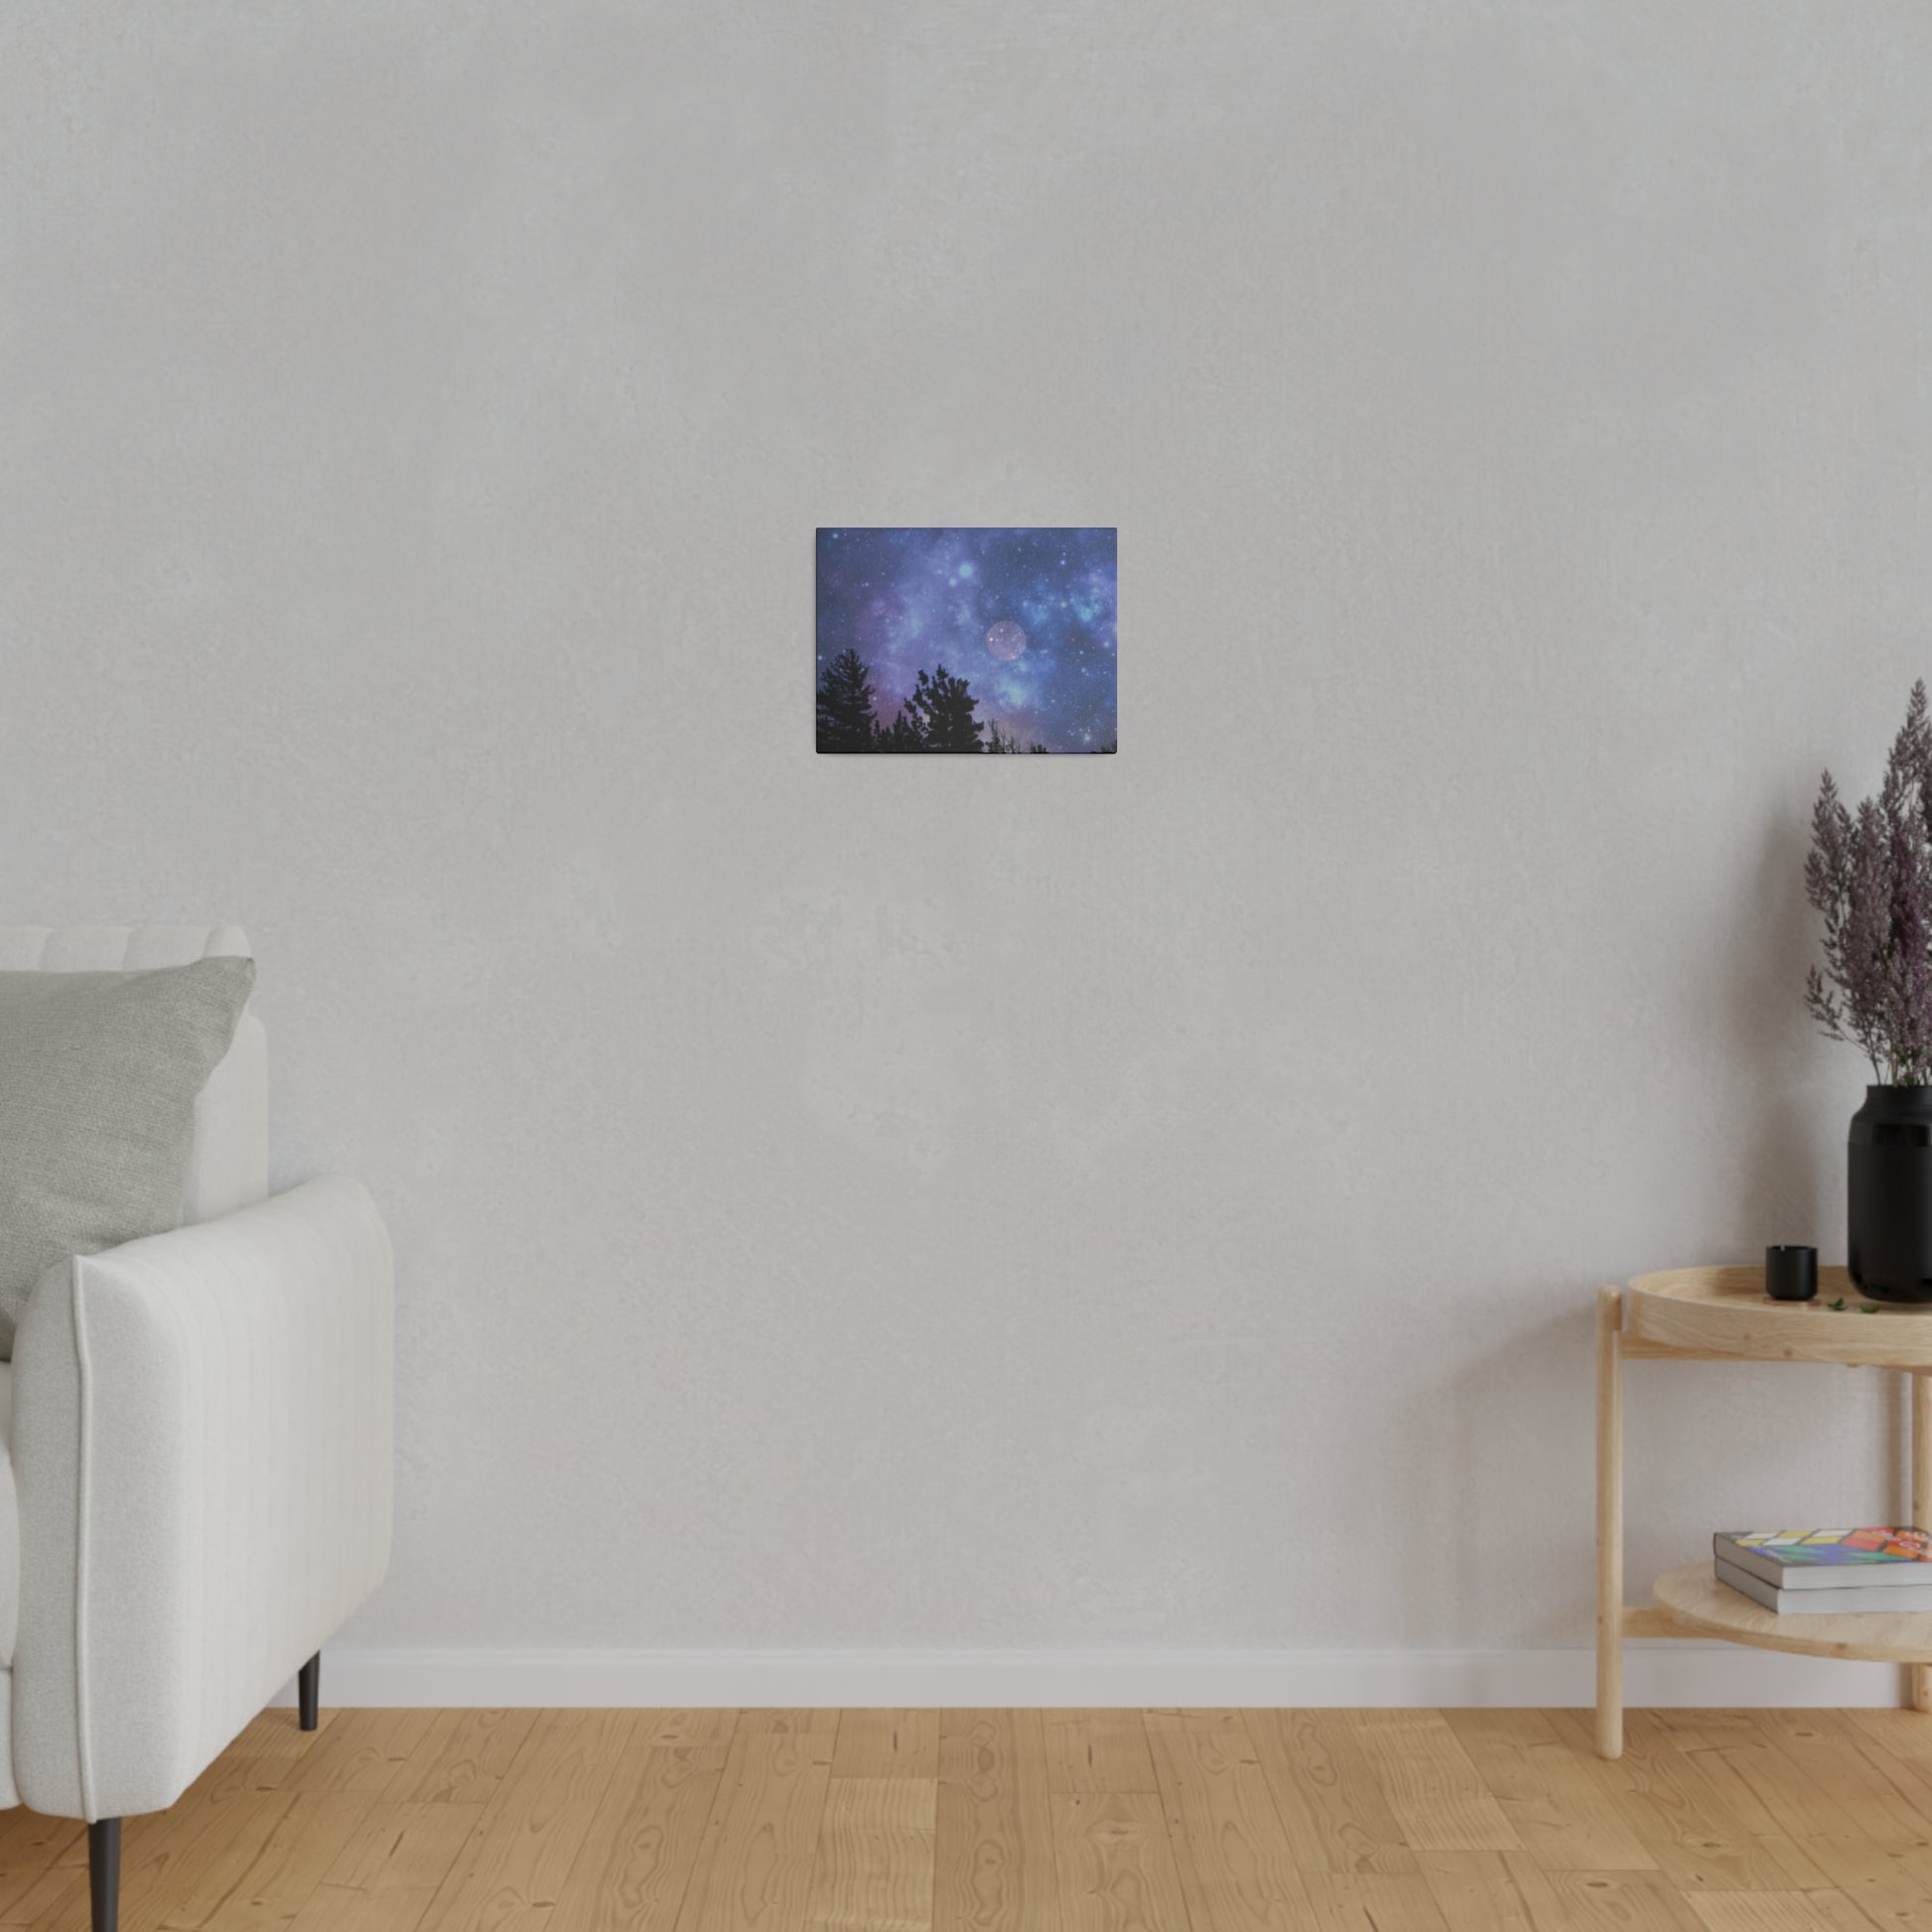 A minimalistic room with a white sofa, a wooden side table, and an astrological Printify Blue-Moon Matte Canvas wall art hanging on a radial pine frame.